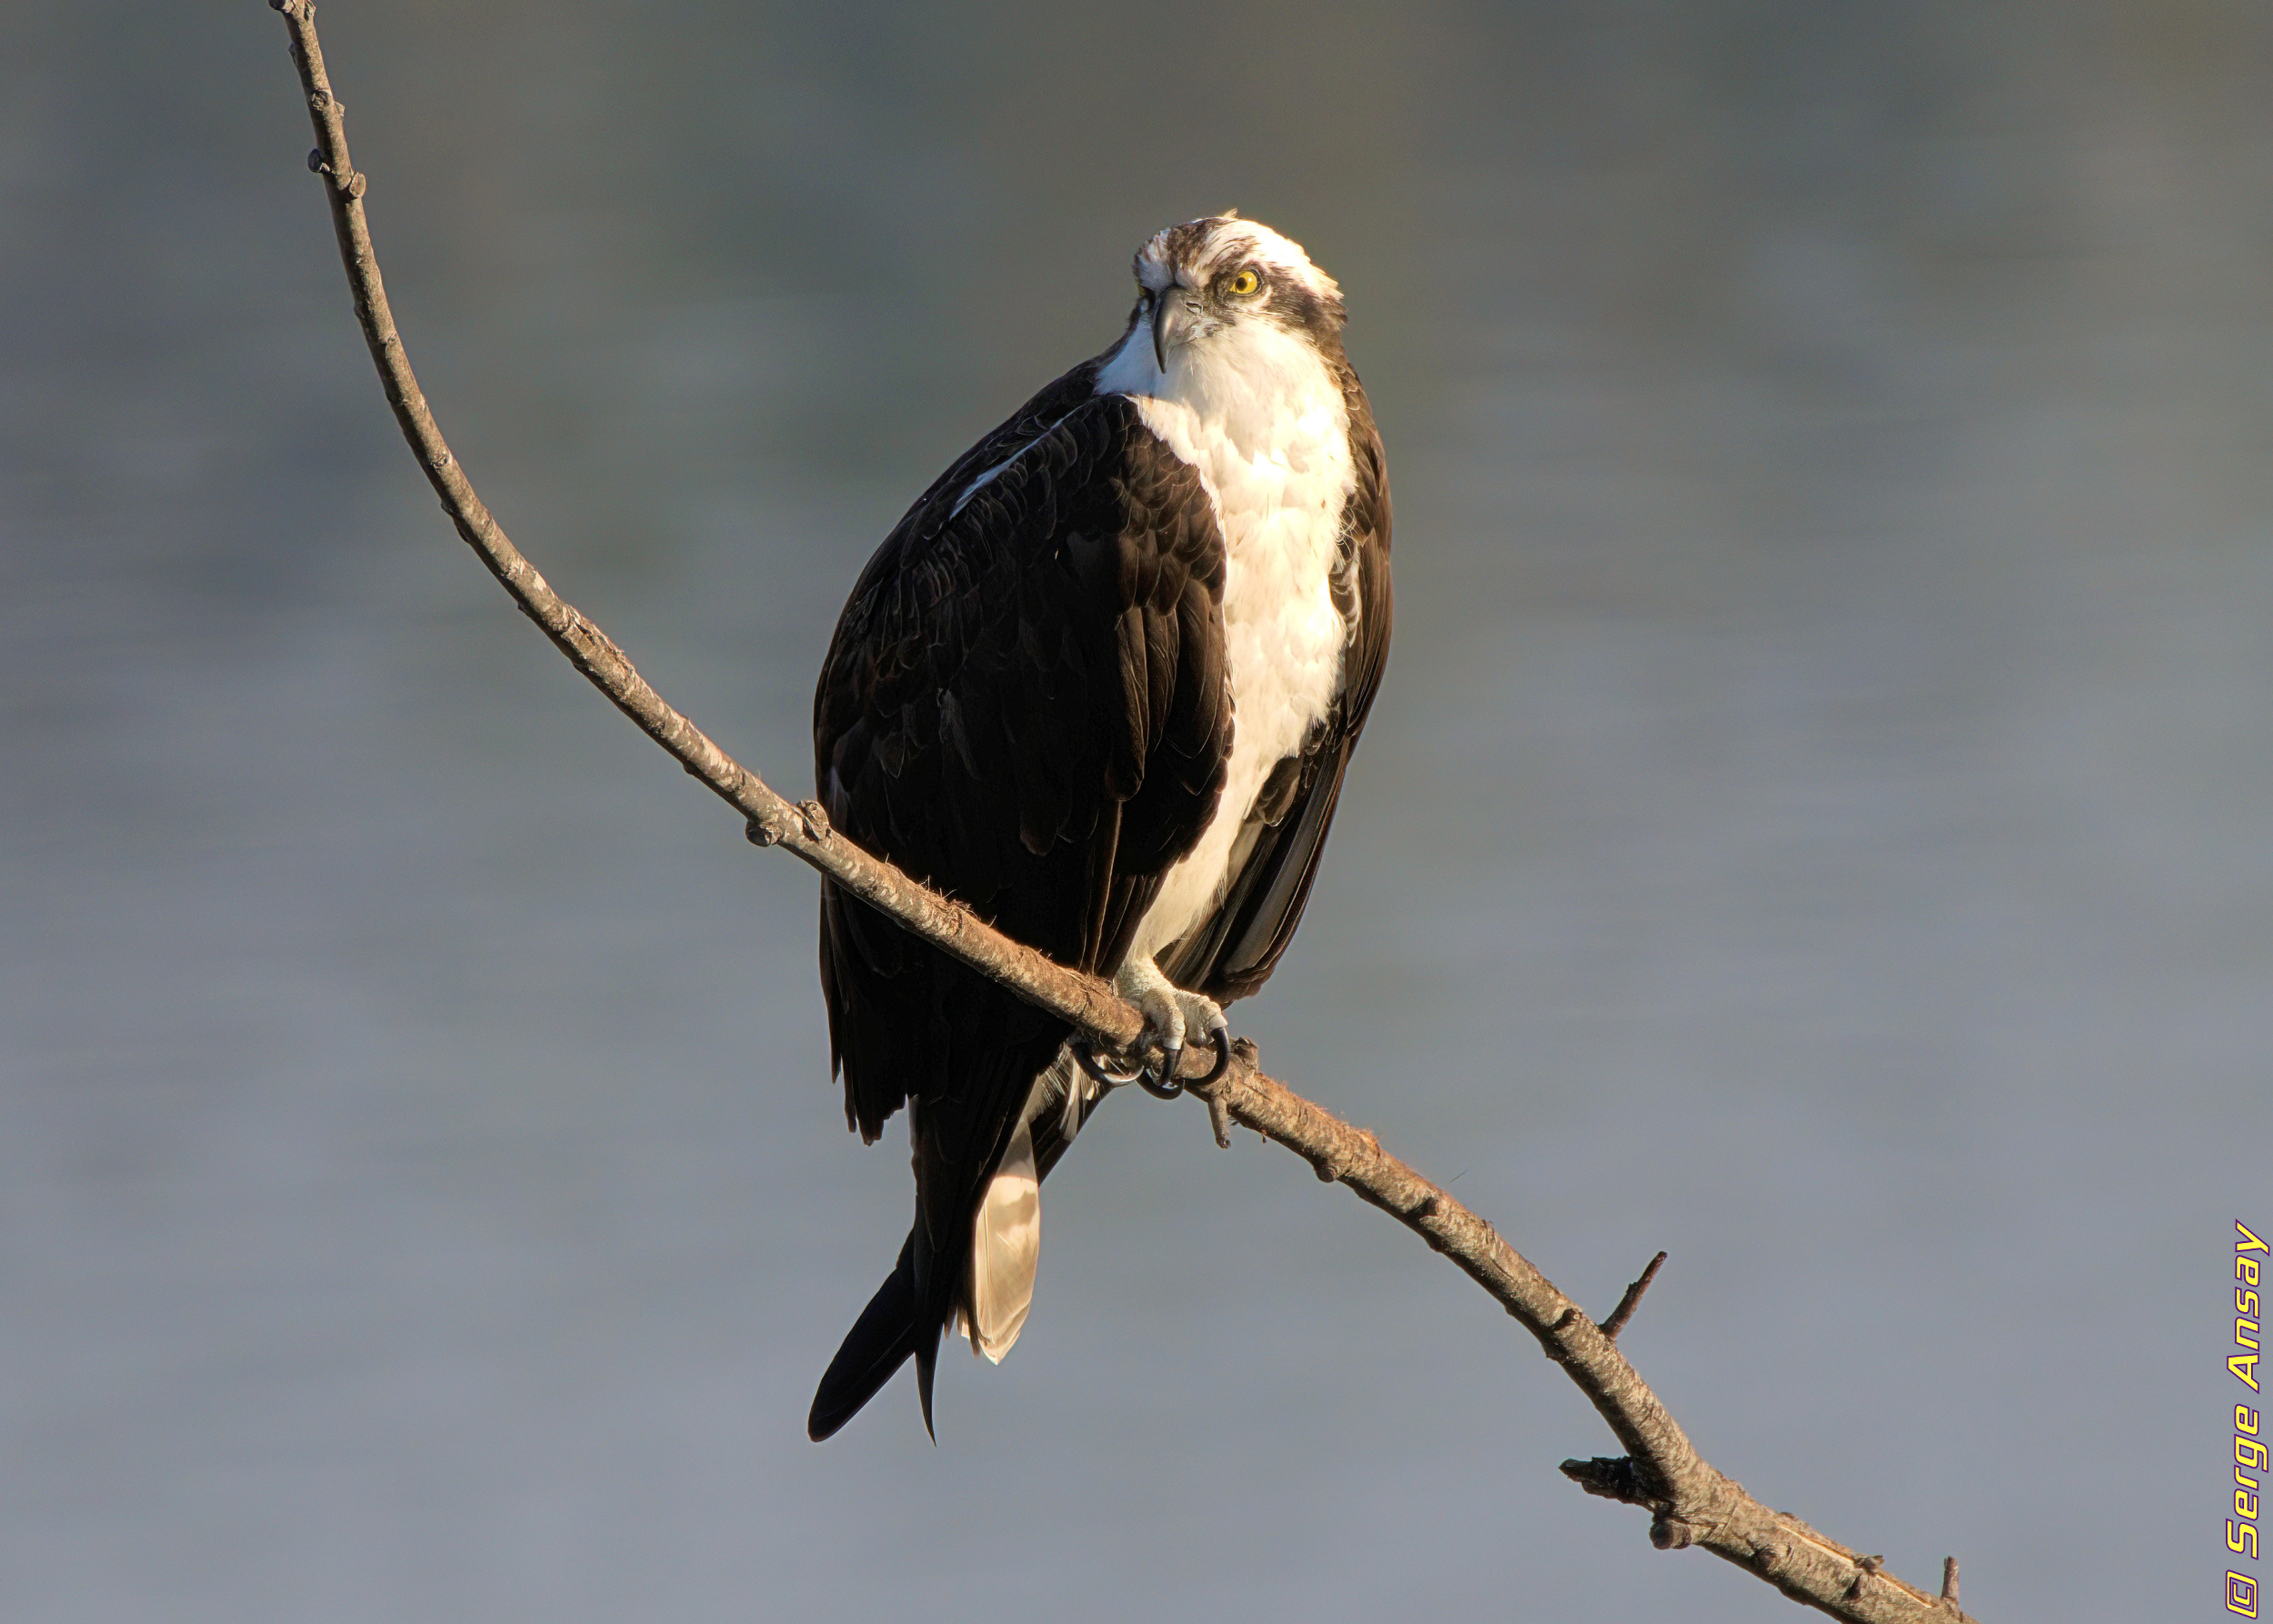 Osprey perched on a branch - 1 of 5